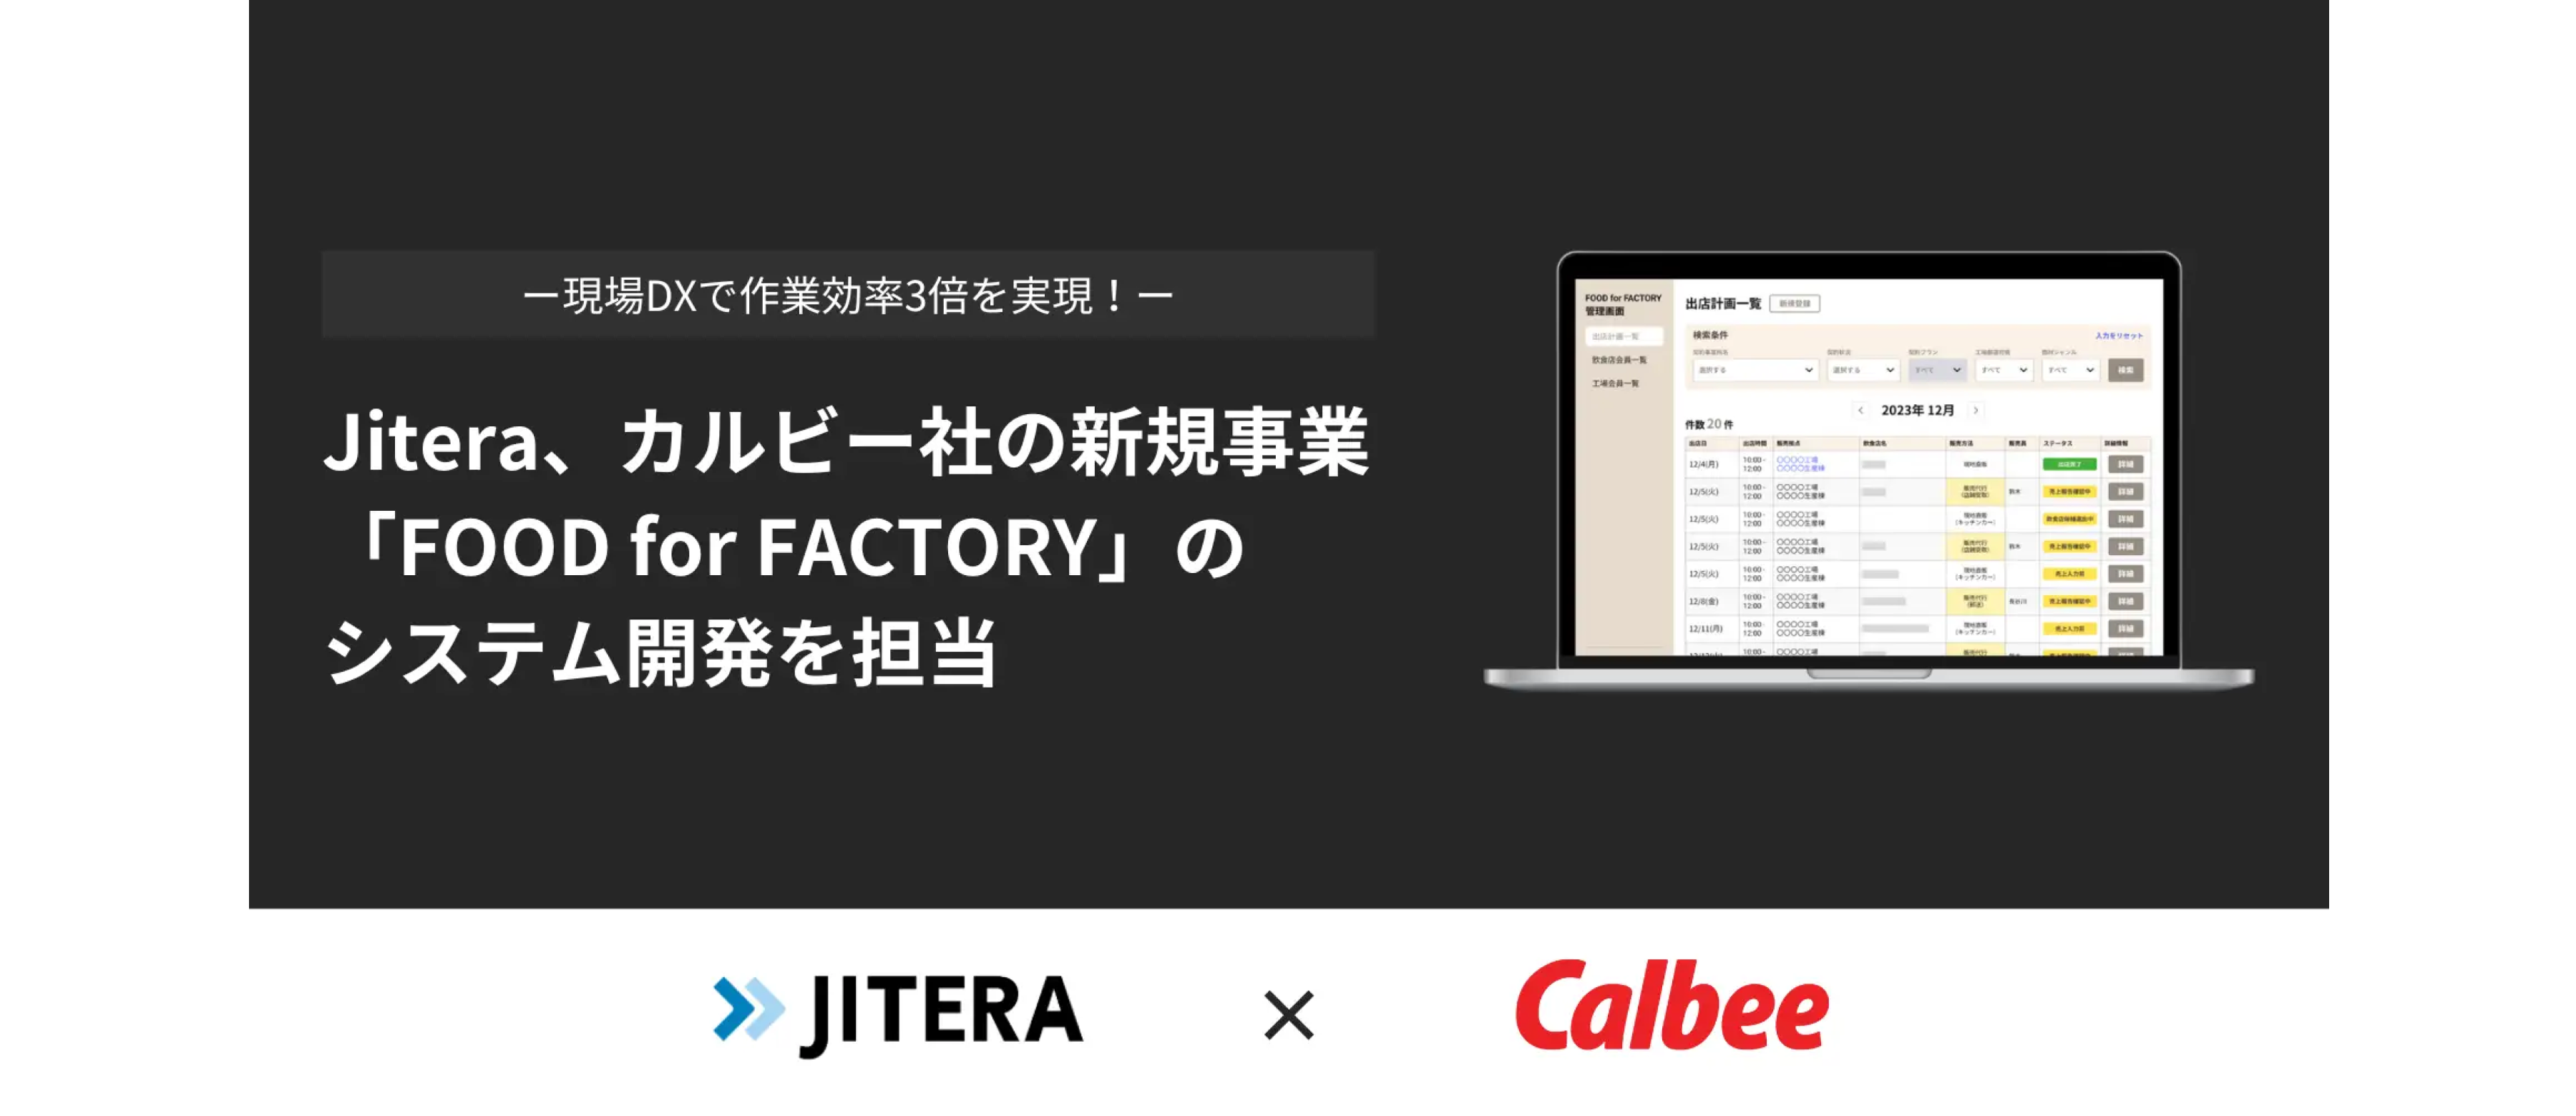 Jitera boosts Calbee's 'FOOD for FACTORY' efficiency with DX.